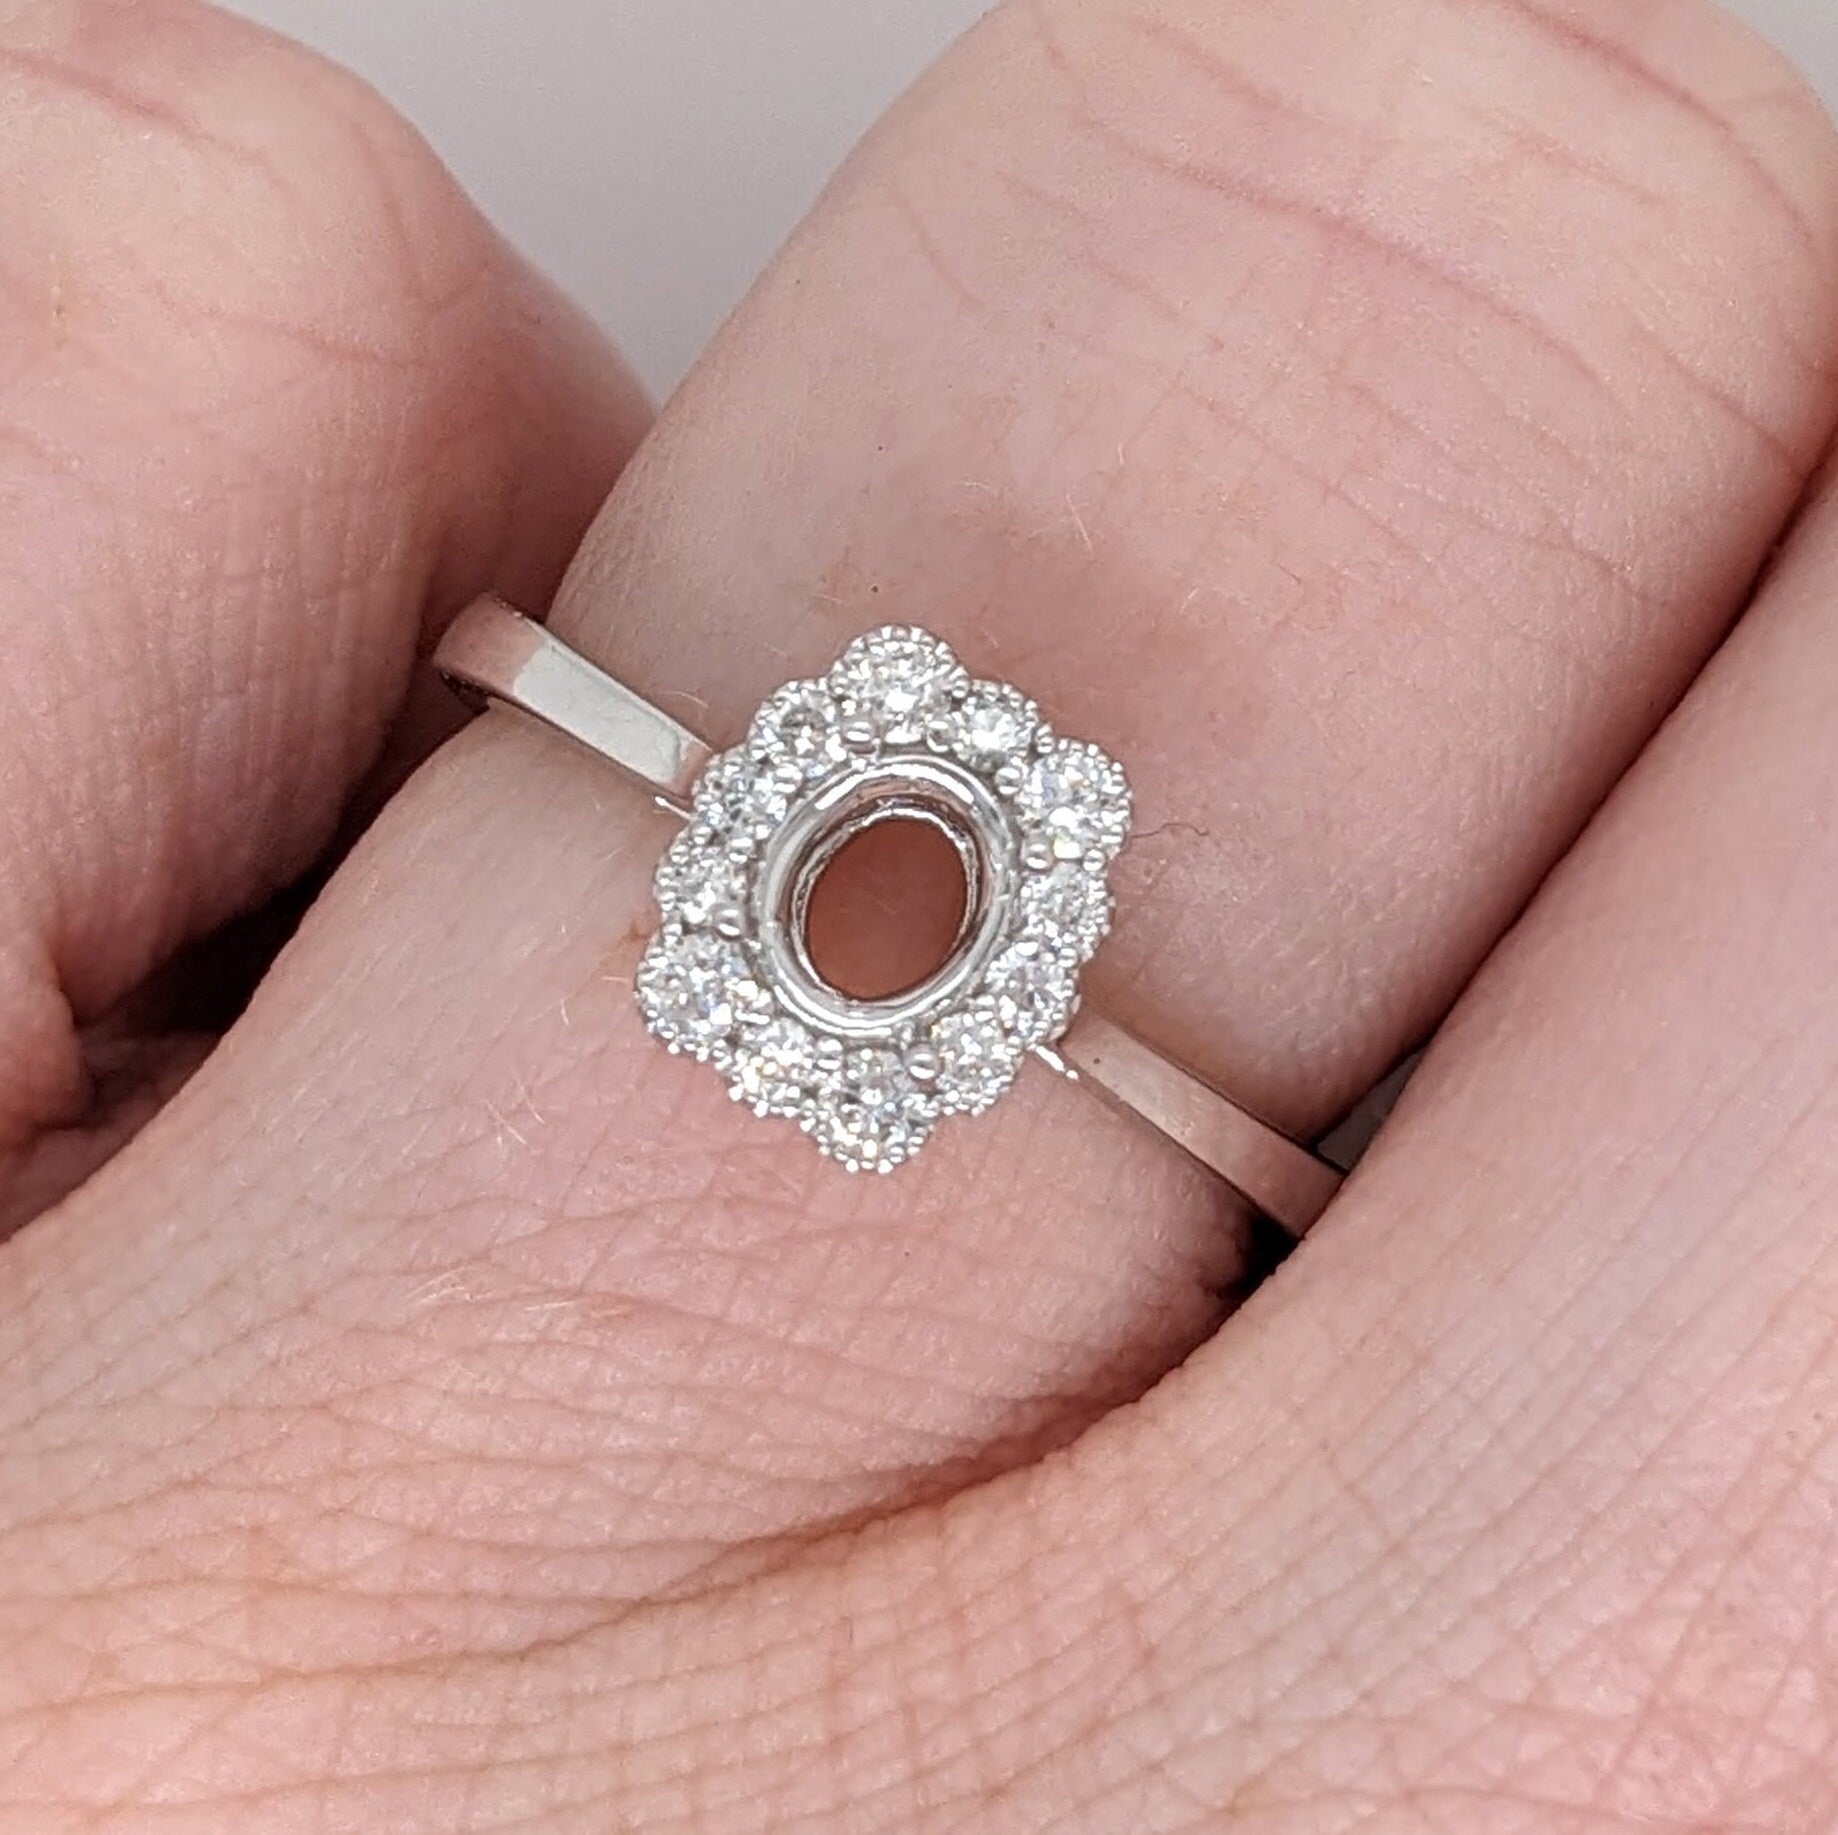 Rings-Oval Ring Semi Mount in Solid 14k White, Yellow or Rose Gold with Natural Diamond Accents | Oval 5x4.5mm | Gemstone Setting | Customizable - NNJGemstones